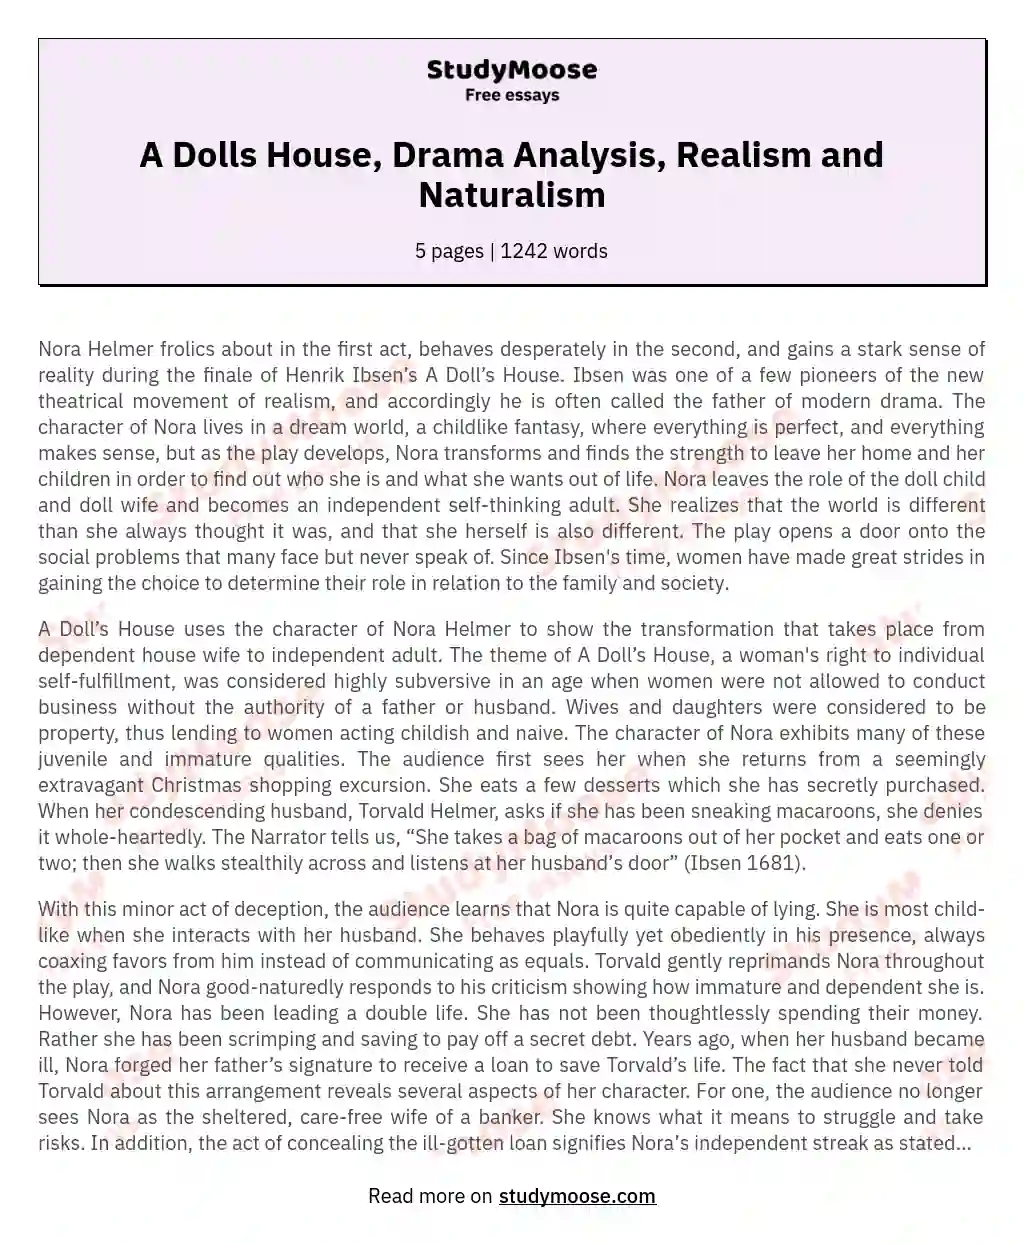 A Dolls House, Drama Analysis, Realism and Naturalism essay